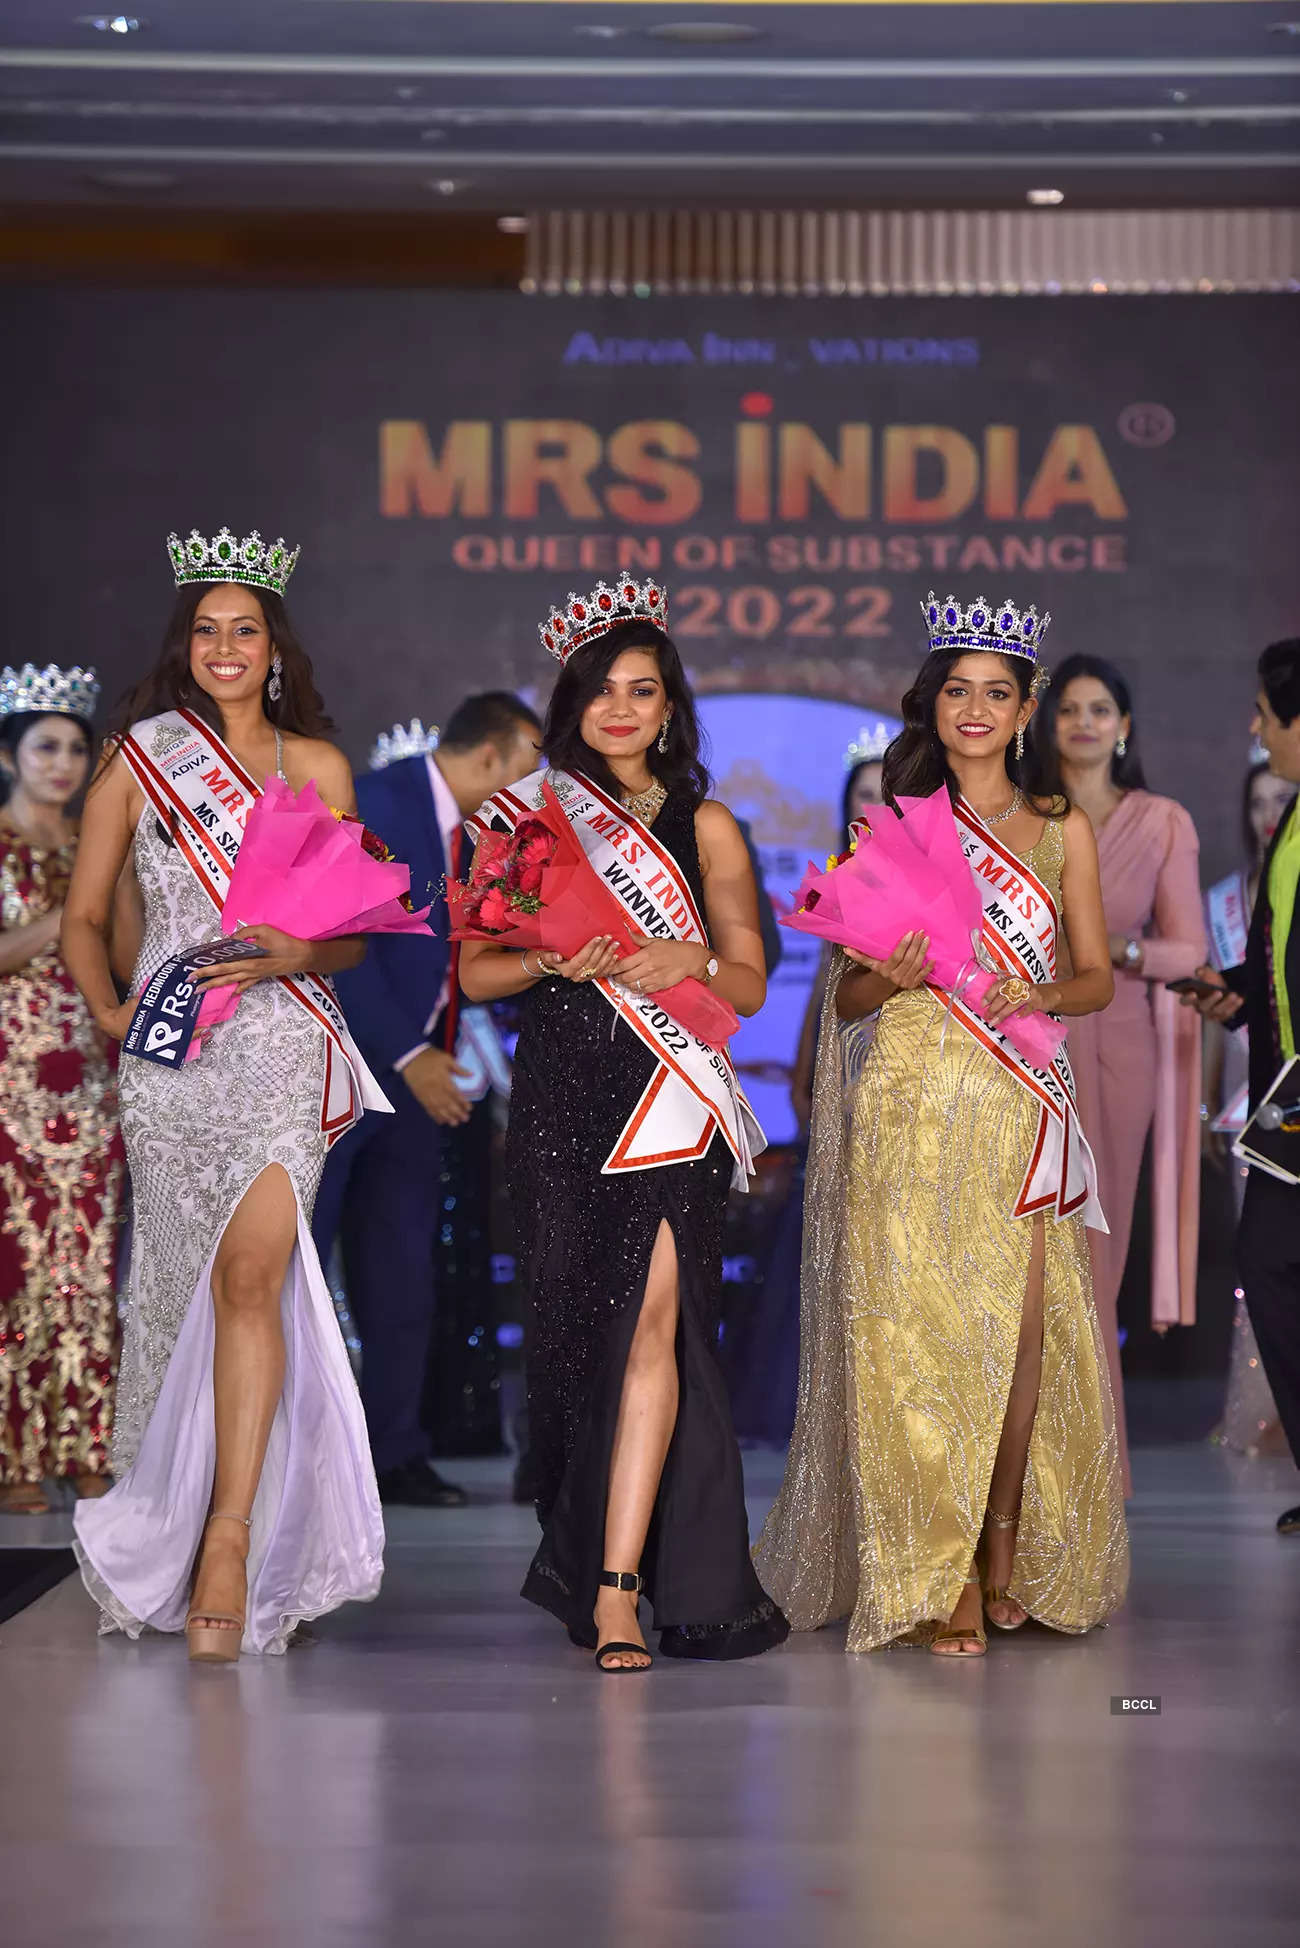 Pictures from Mrs India Queen of Substance 2022 event concluded in Delhi